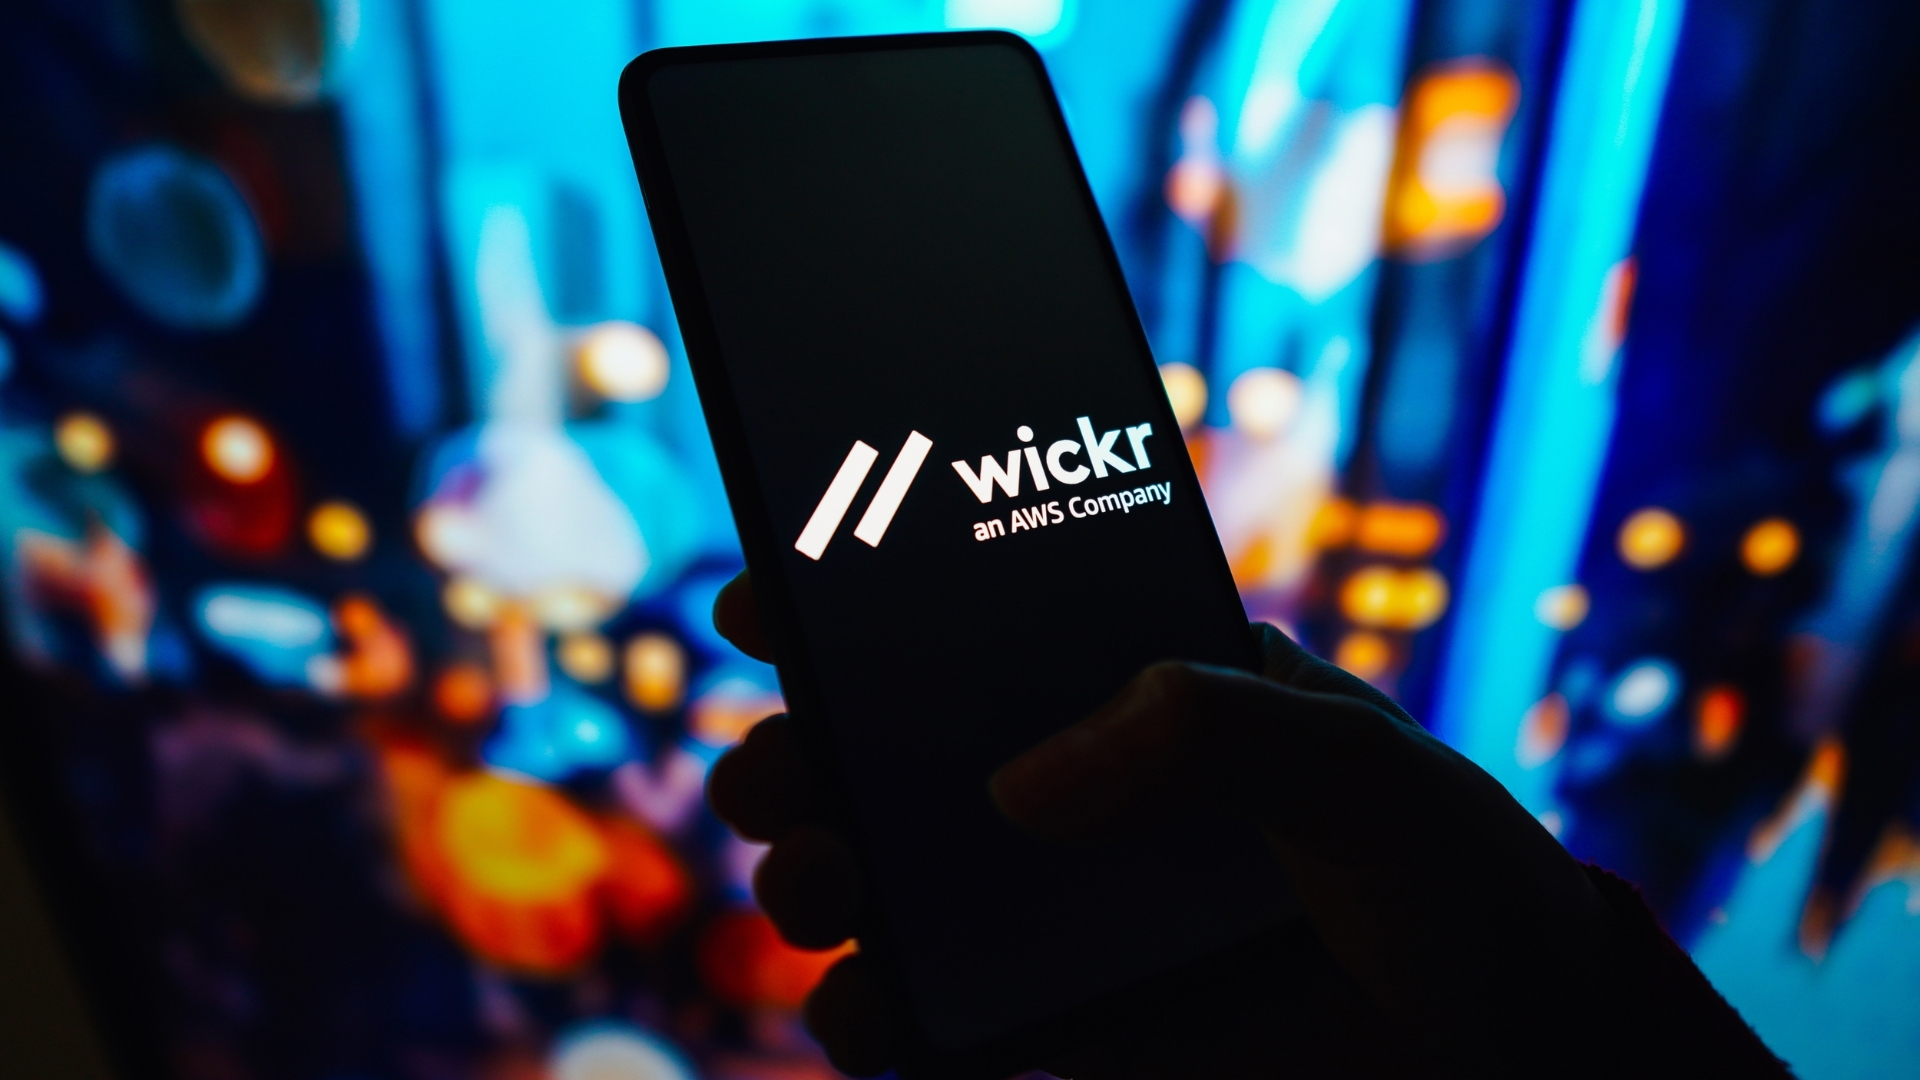 Wickr Company Background Information